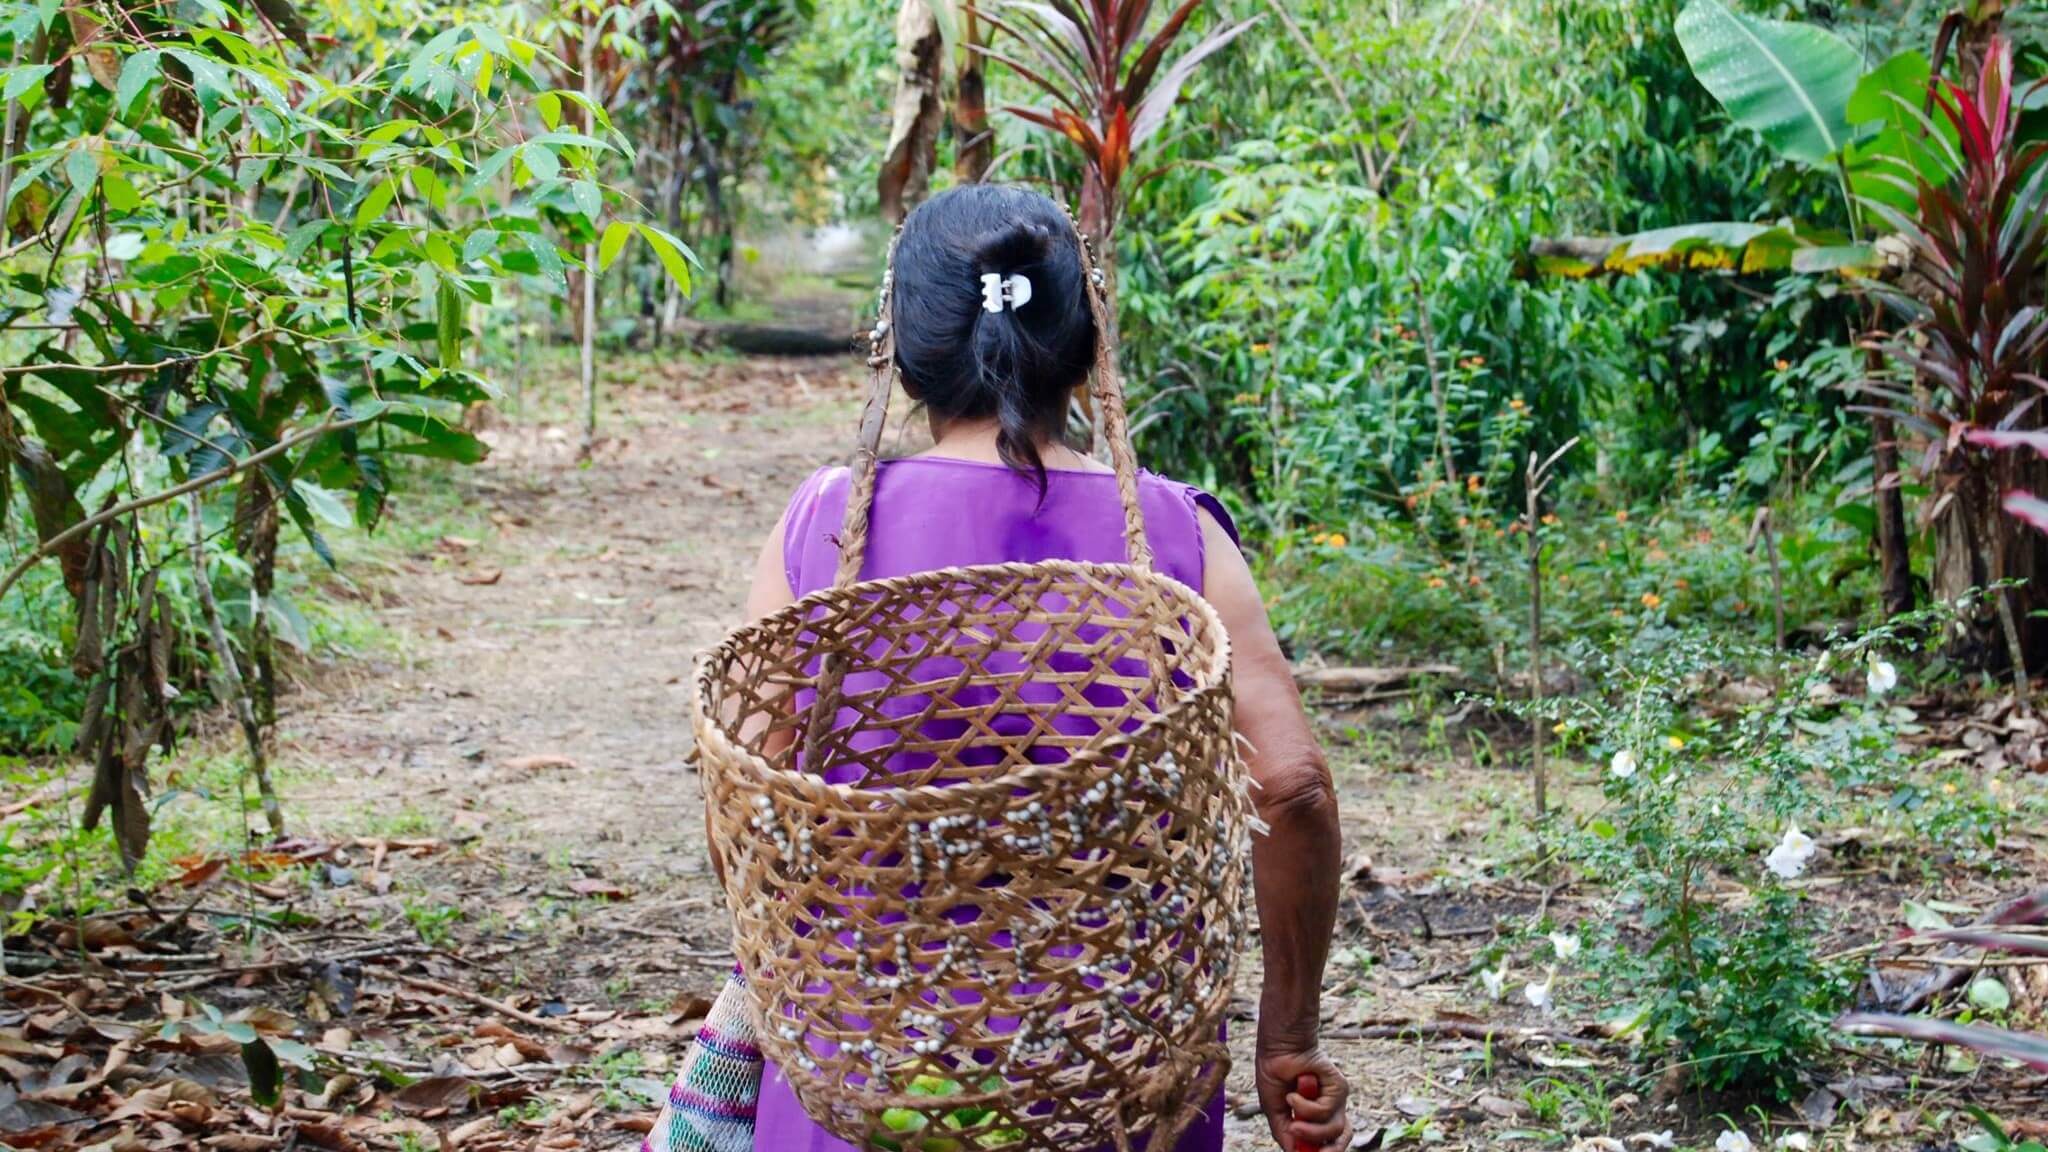 A local Ecuadorian woman is walking through the plantations (called la chakra) carrying her harvest in a basket that's hanging from hear head. Photo from Amupakin's gardens, Archidona, Tena, Amazon rainforest of Ecuador | Impactful Travel